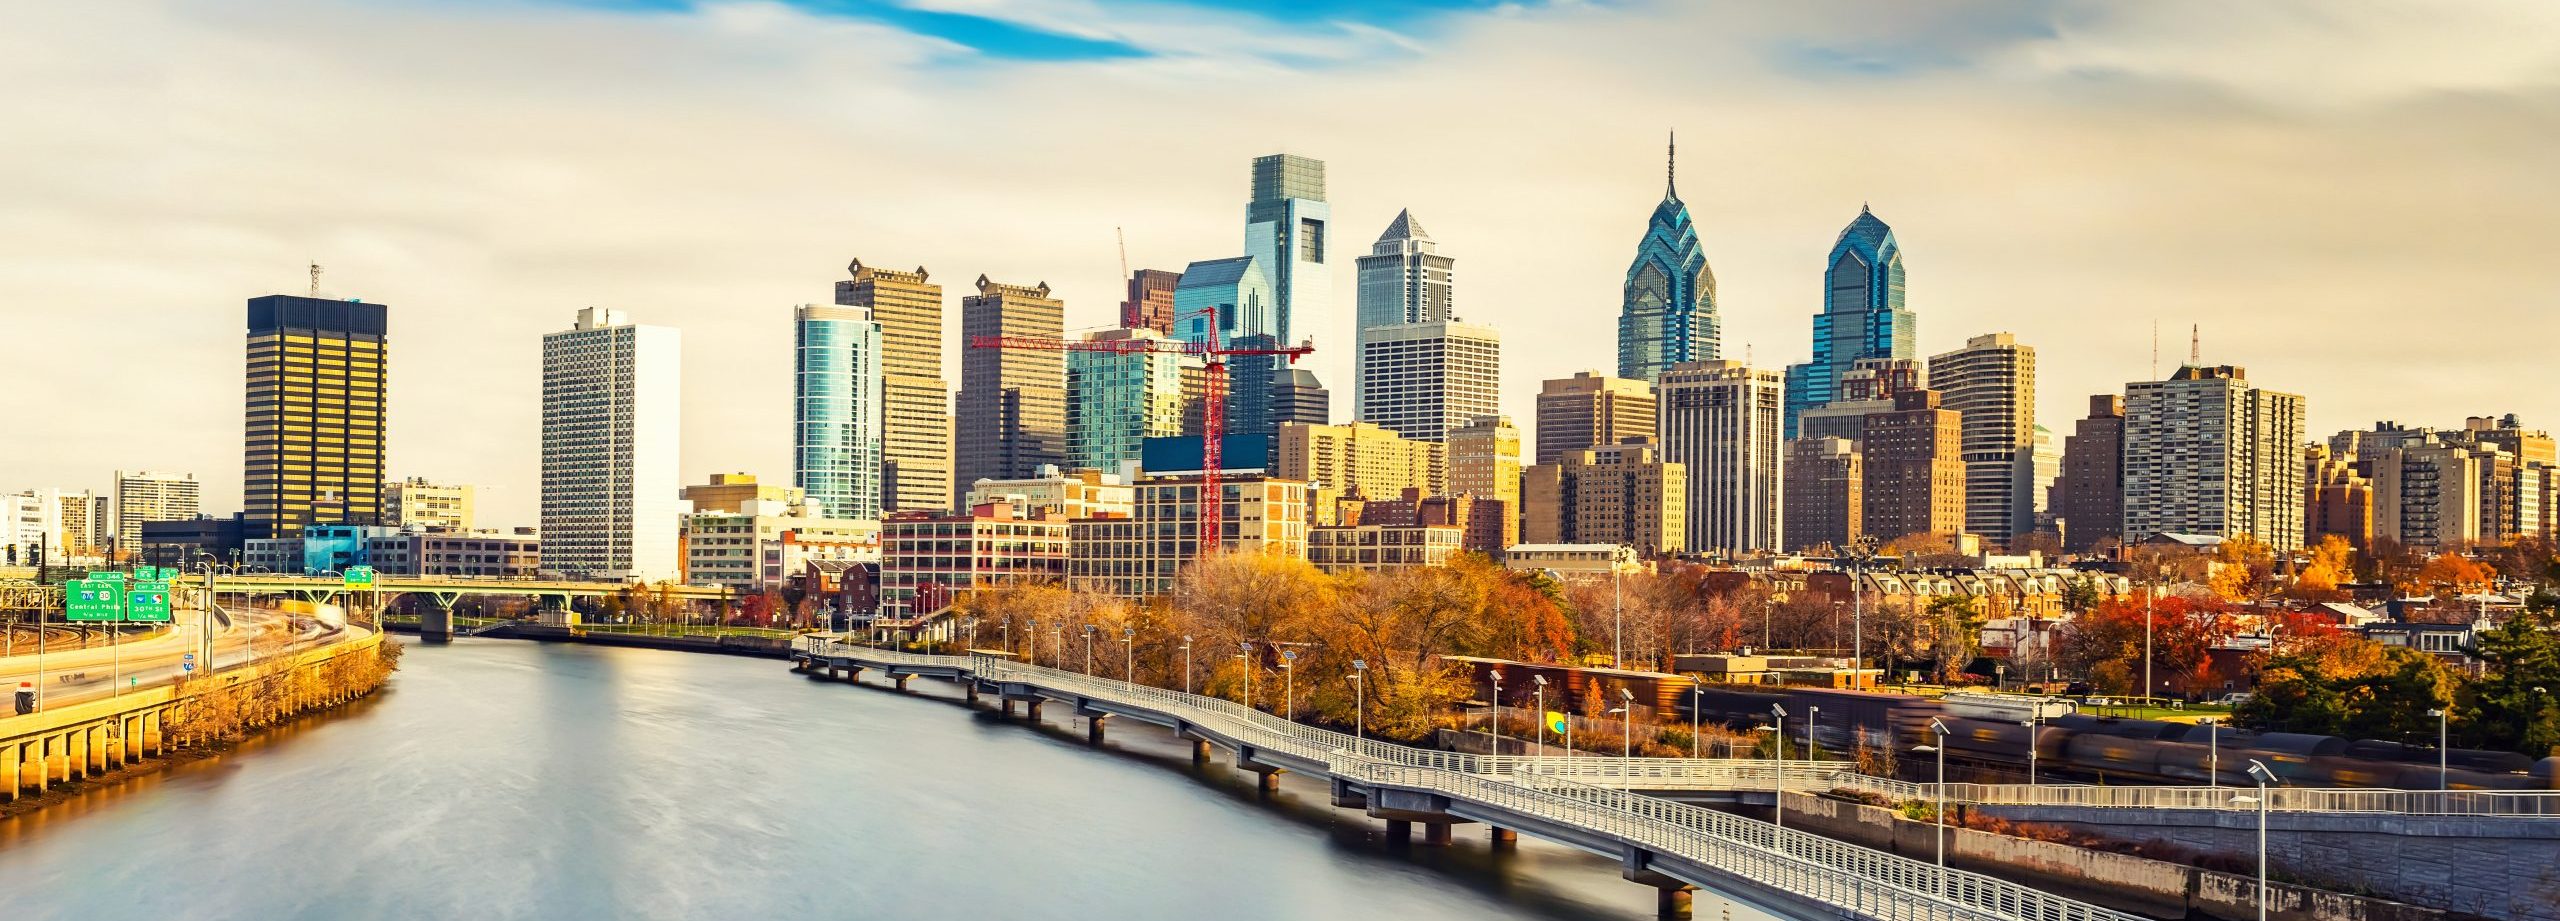 BluSky Restoration Accelerates Growth with New Office in Philadelphia